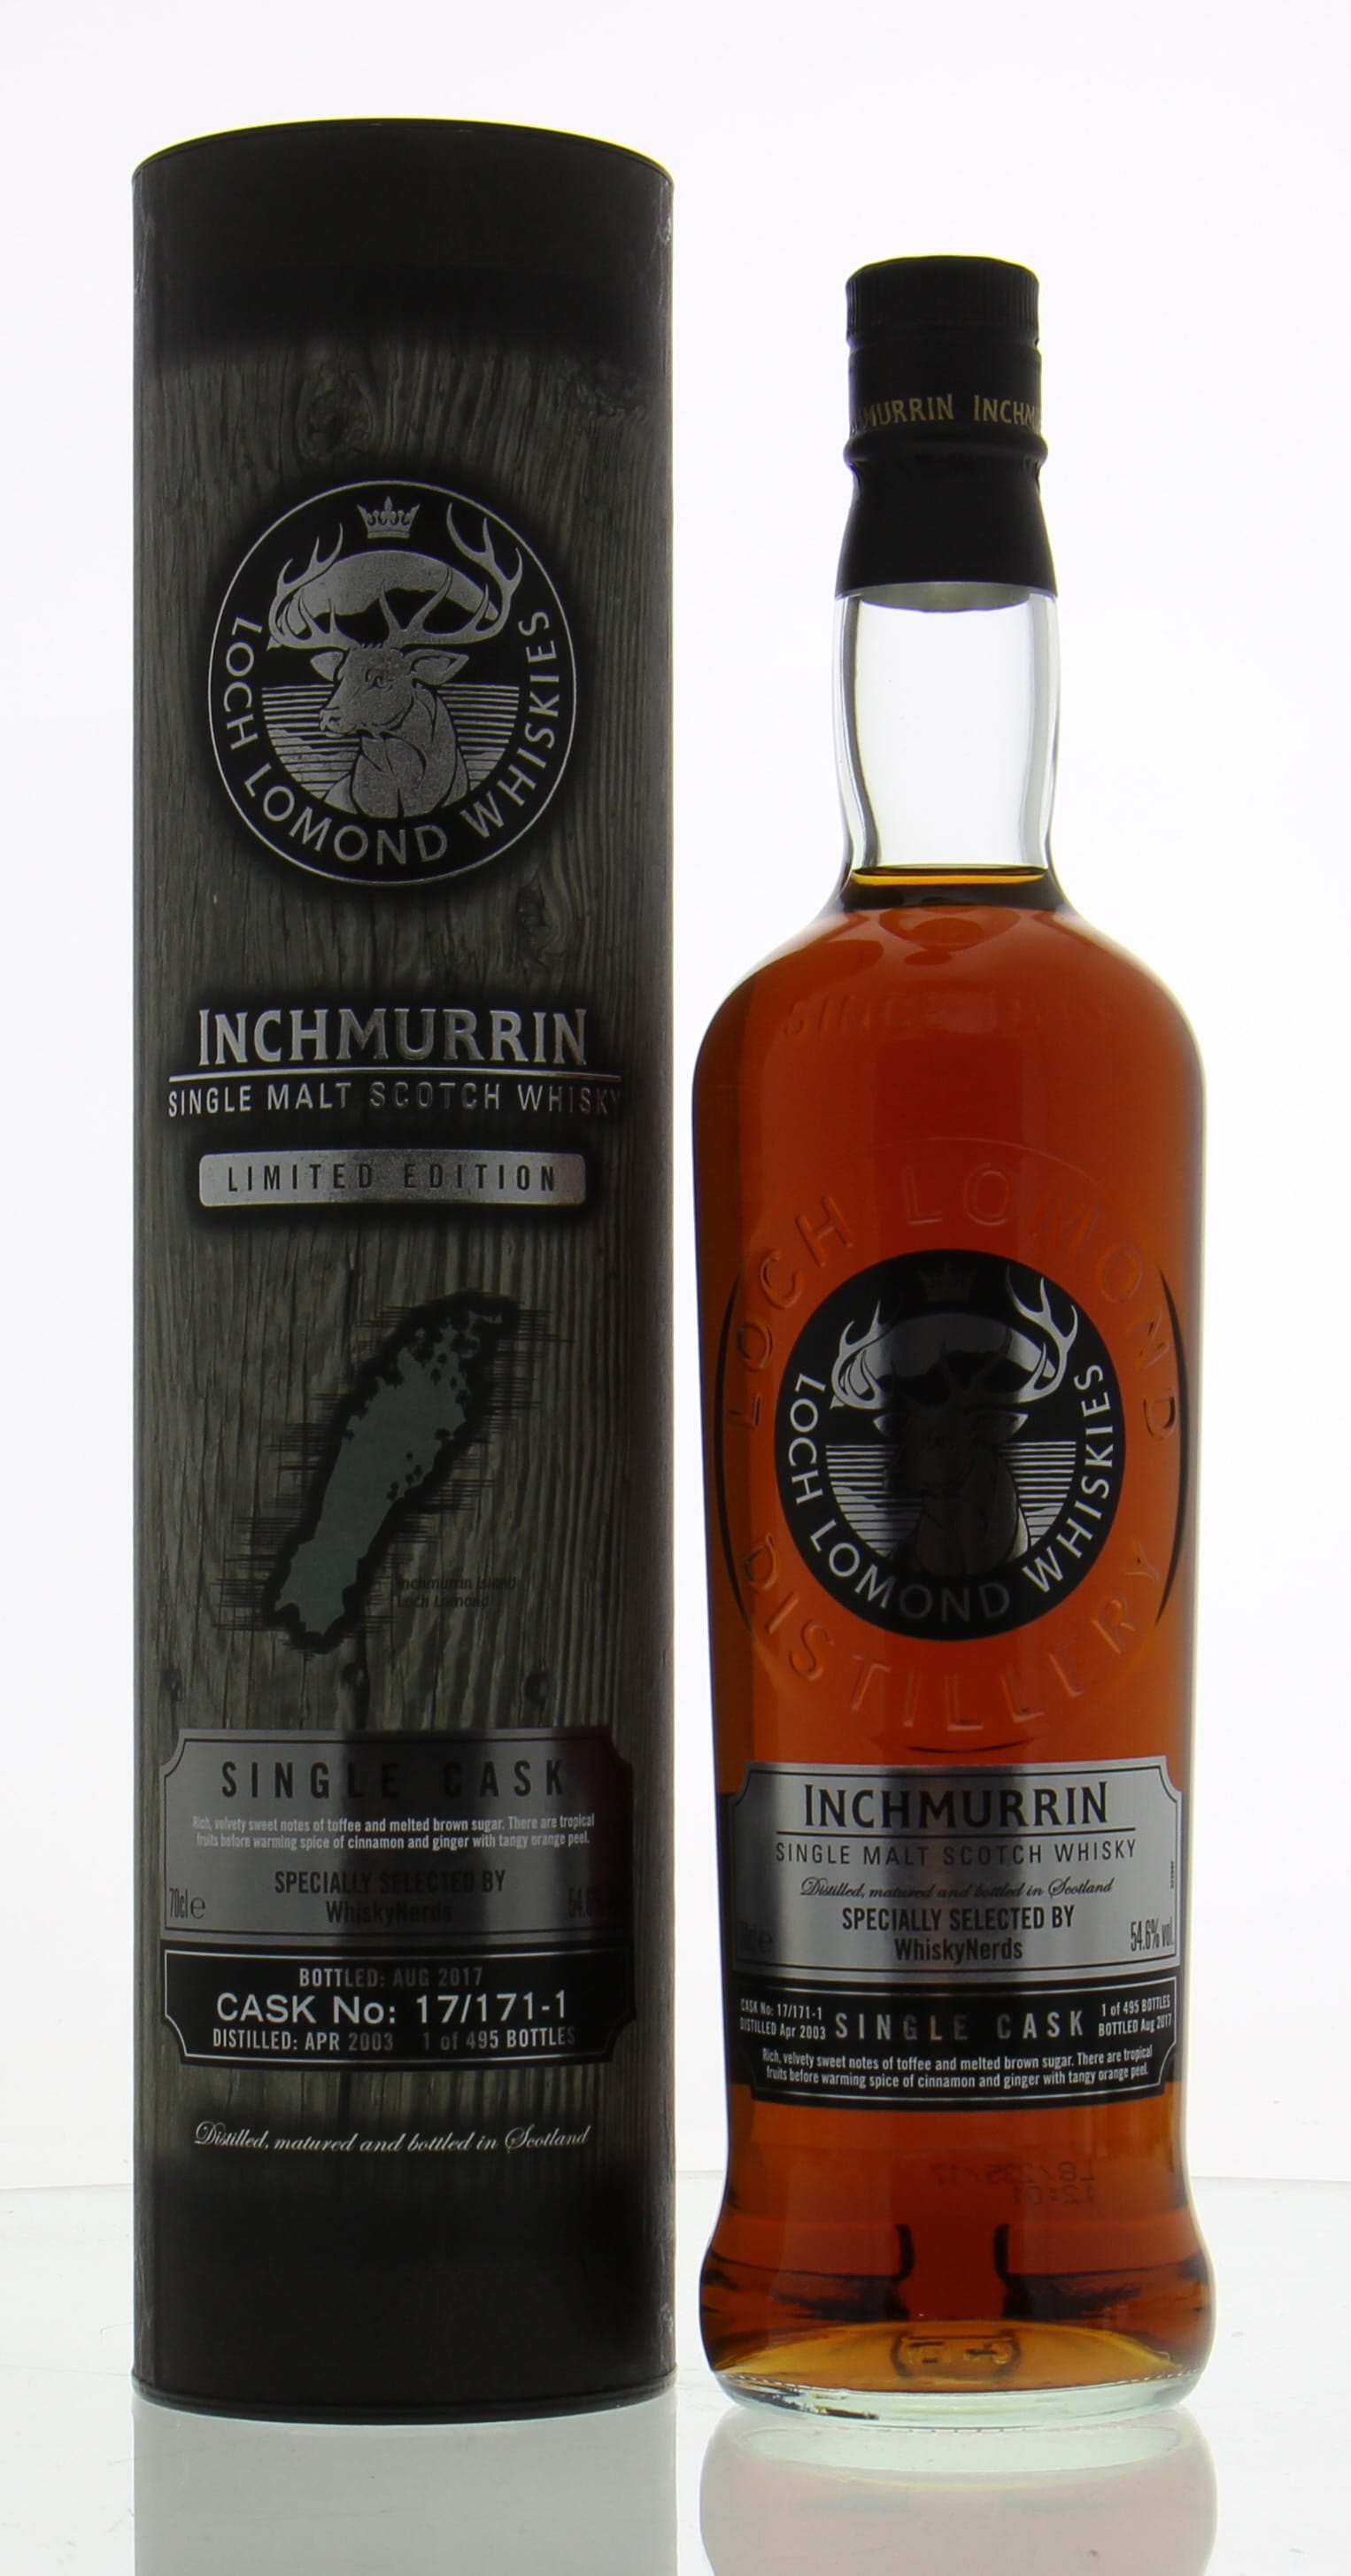 Inchmurrin - 14 Years Old Executive For WhiskyNerds Cask:17/171-1 54.6% 2003 In Original Container